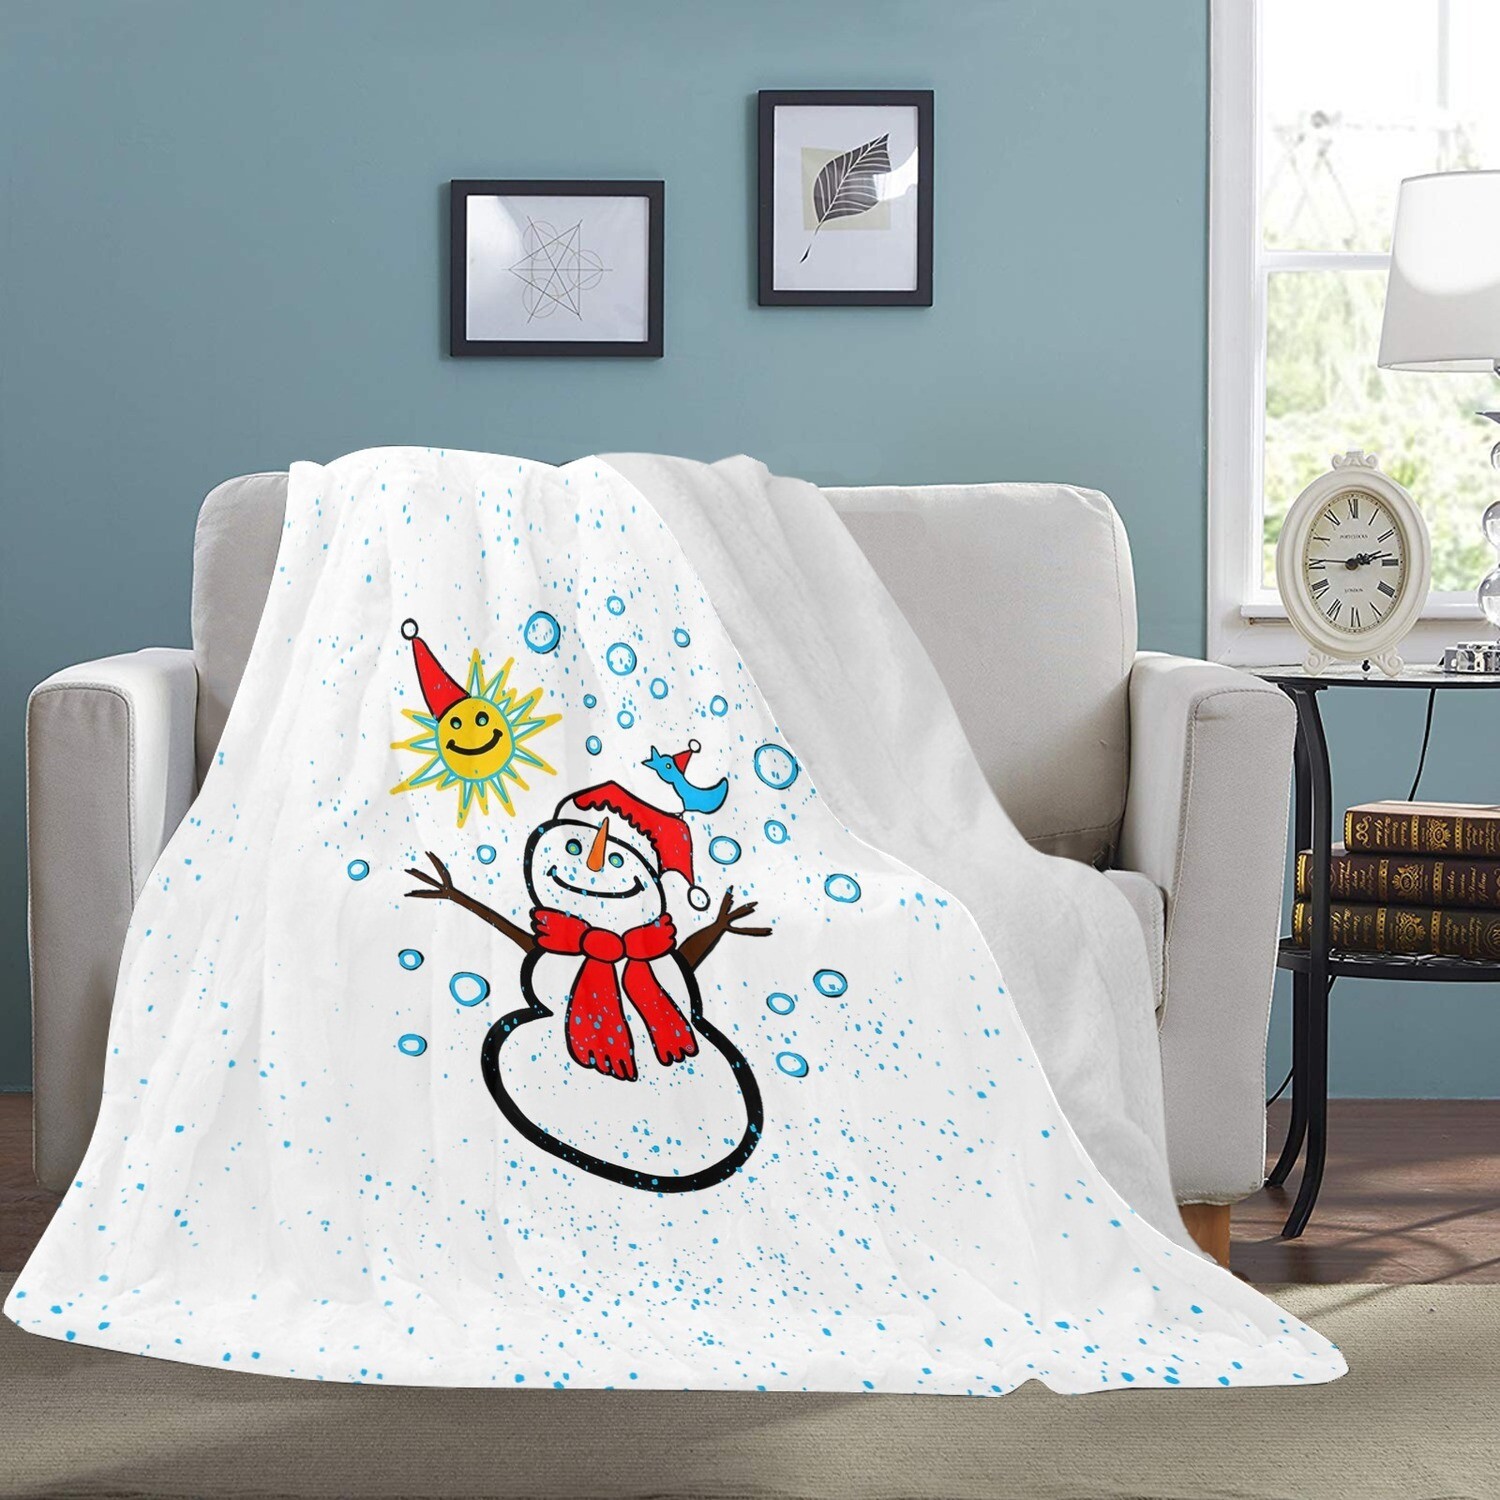 🤴🏽👸🏽☃️Large Ultra-Soft Micro Fleece Blanket Snowman and his blue bird by Maru, gift, gift for her, gift for him, gift for them, 70"x80", white